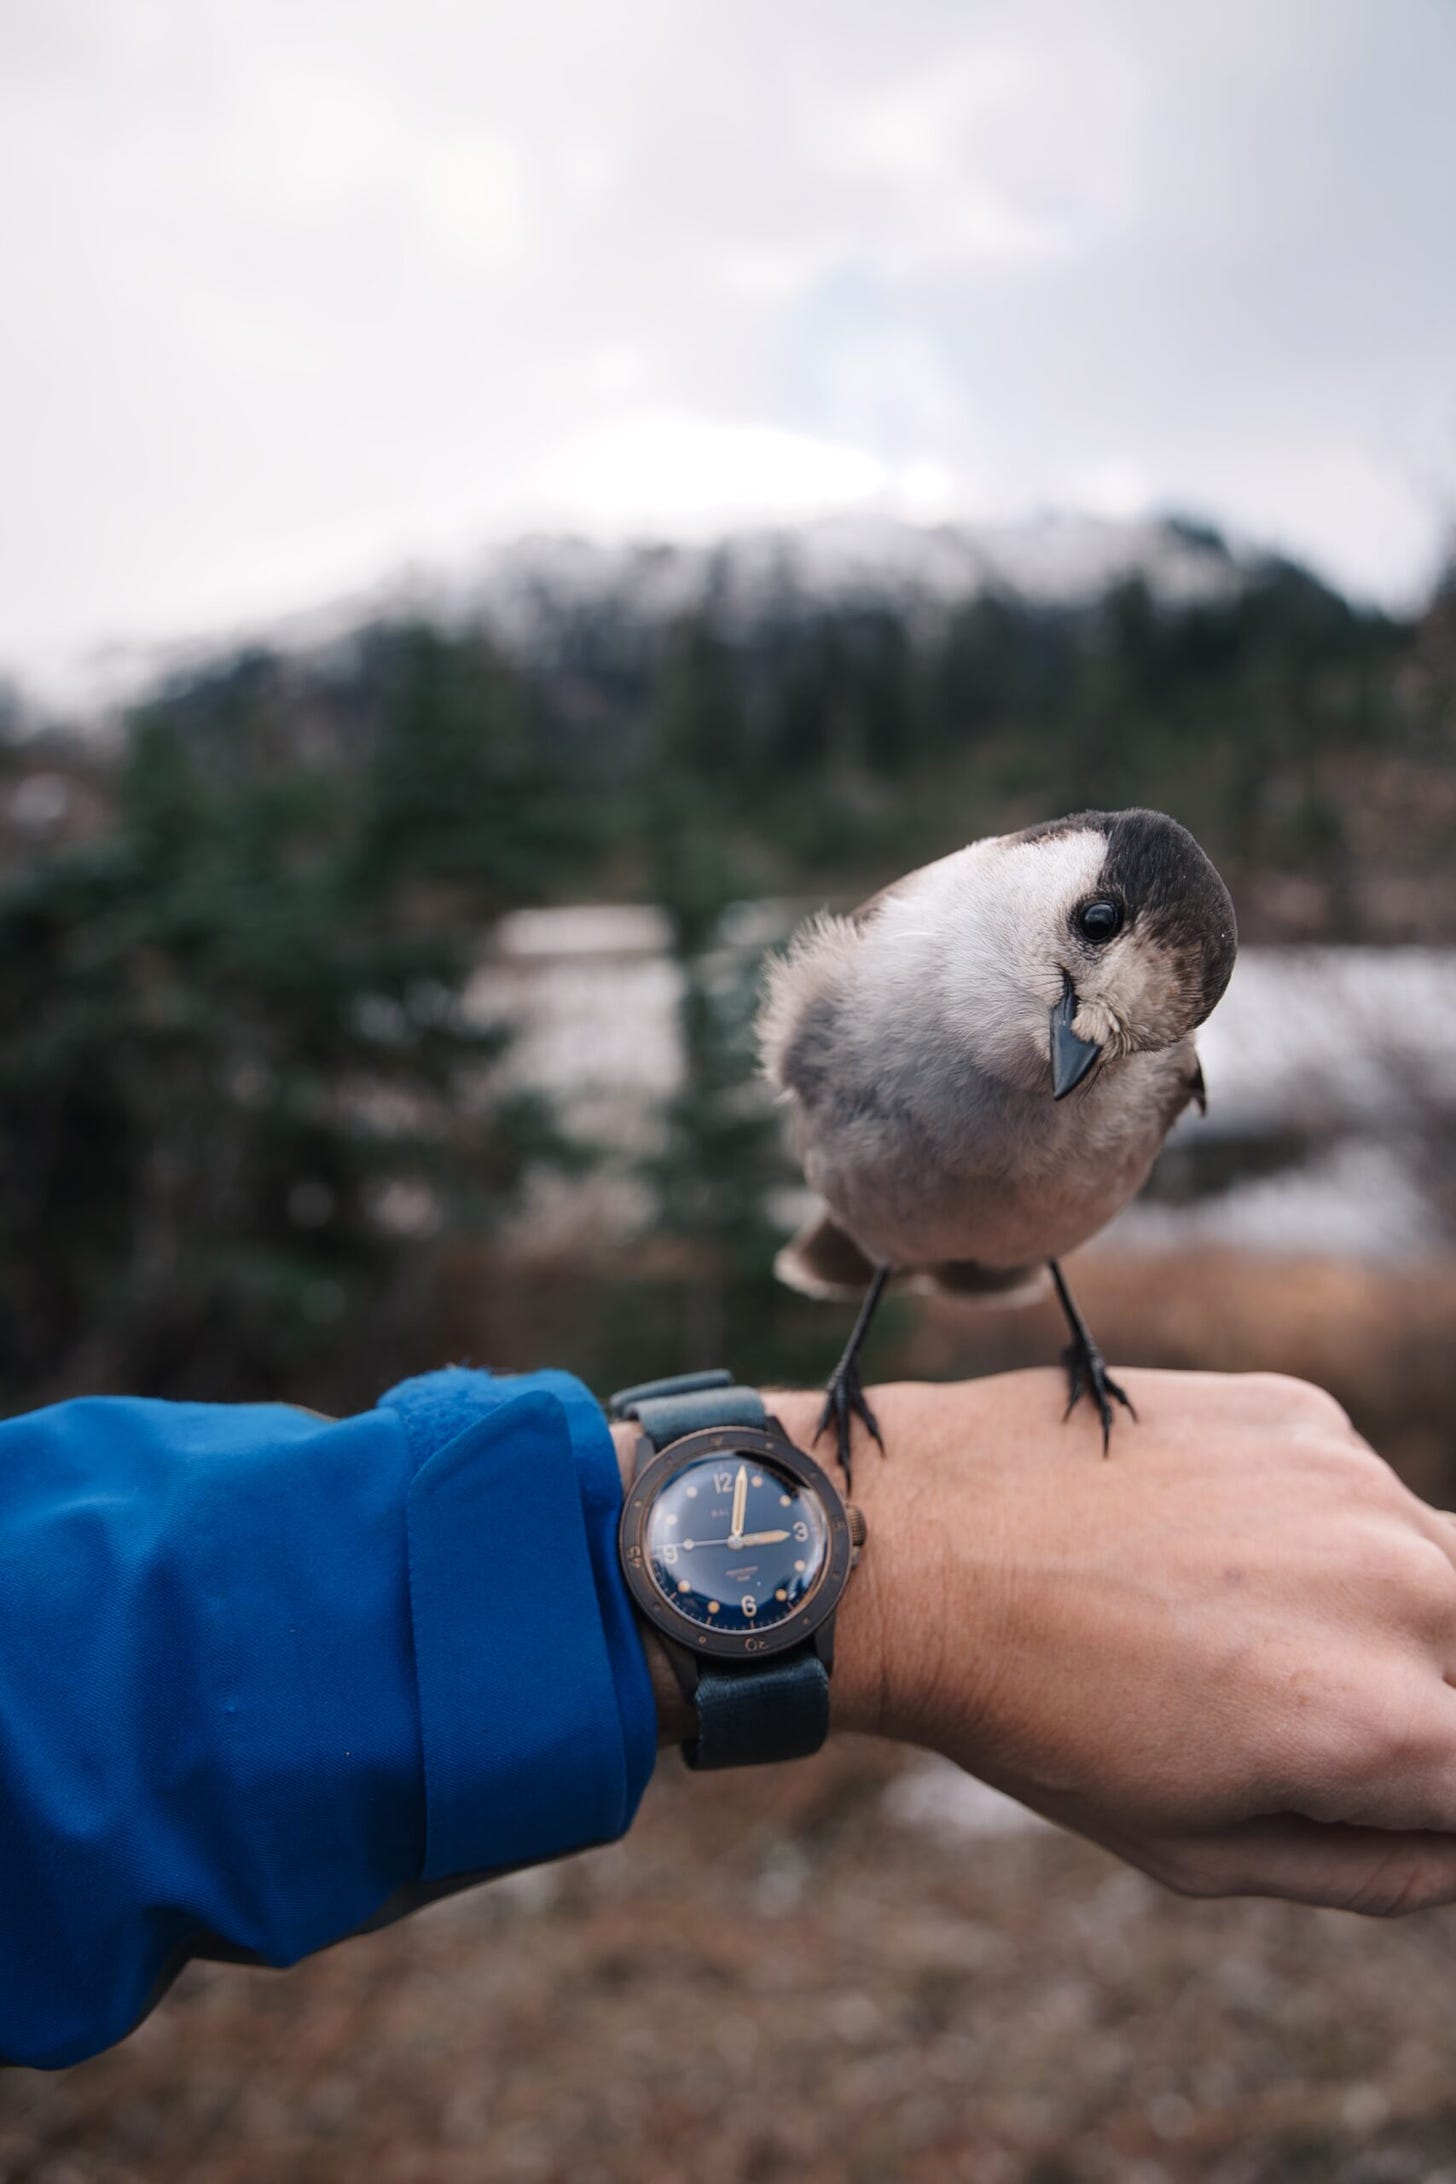 A wrist shot in the woods with a Snow Jay standing on wrist with its head cocked looking directly at you.